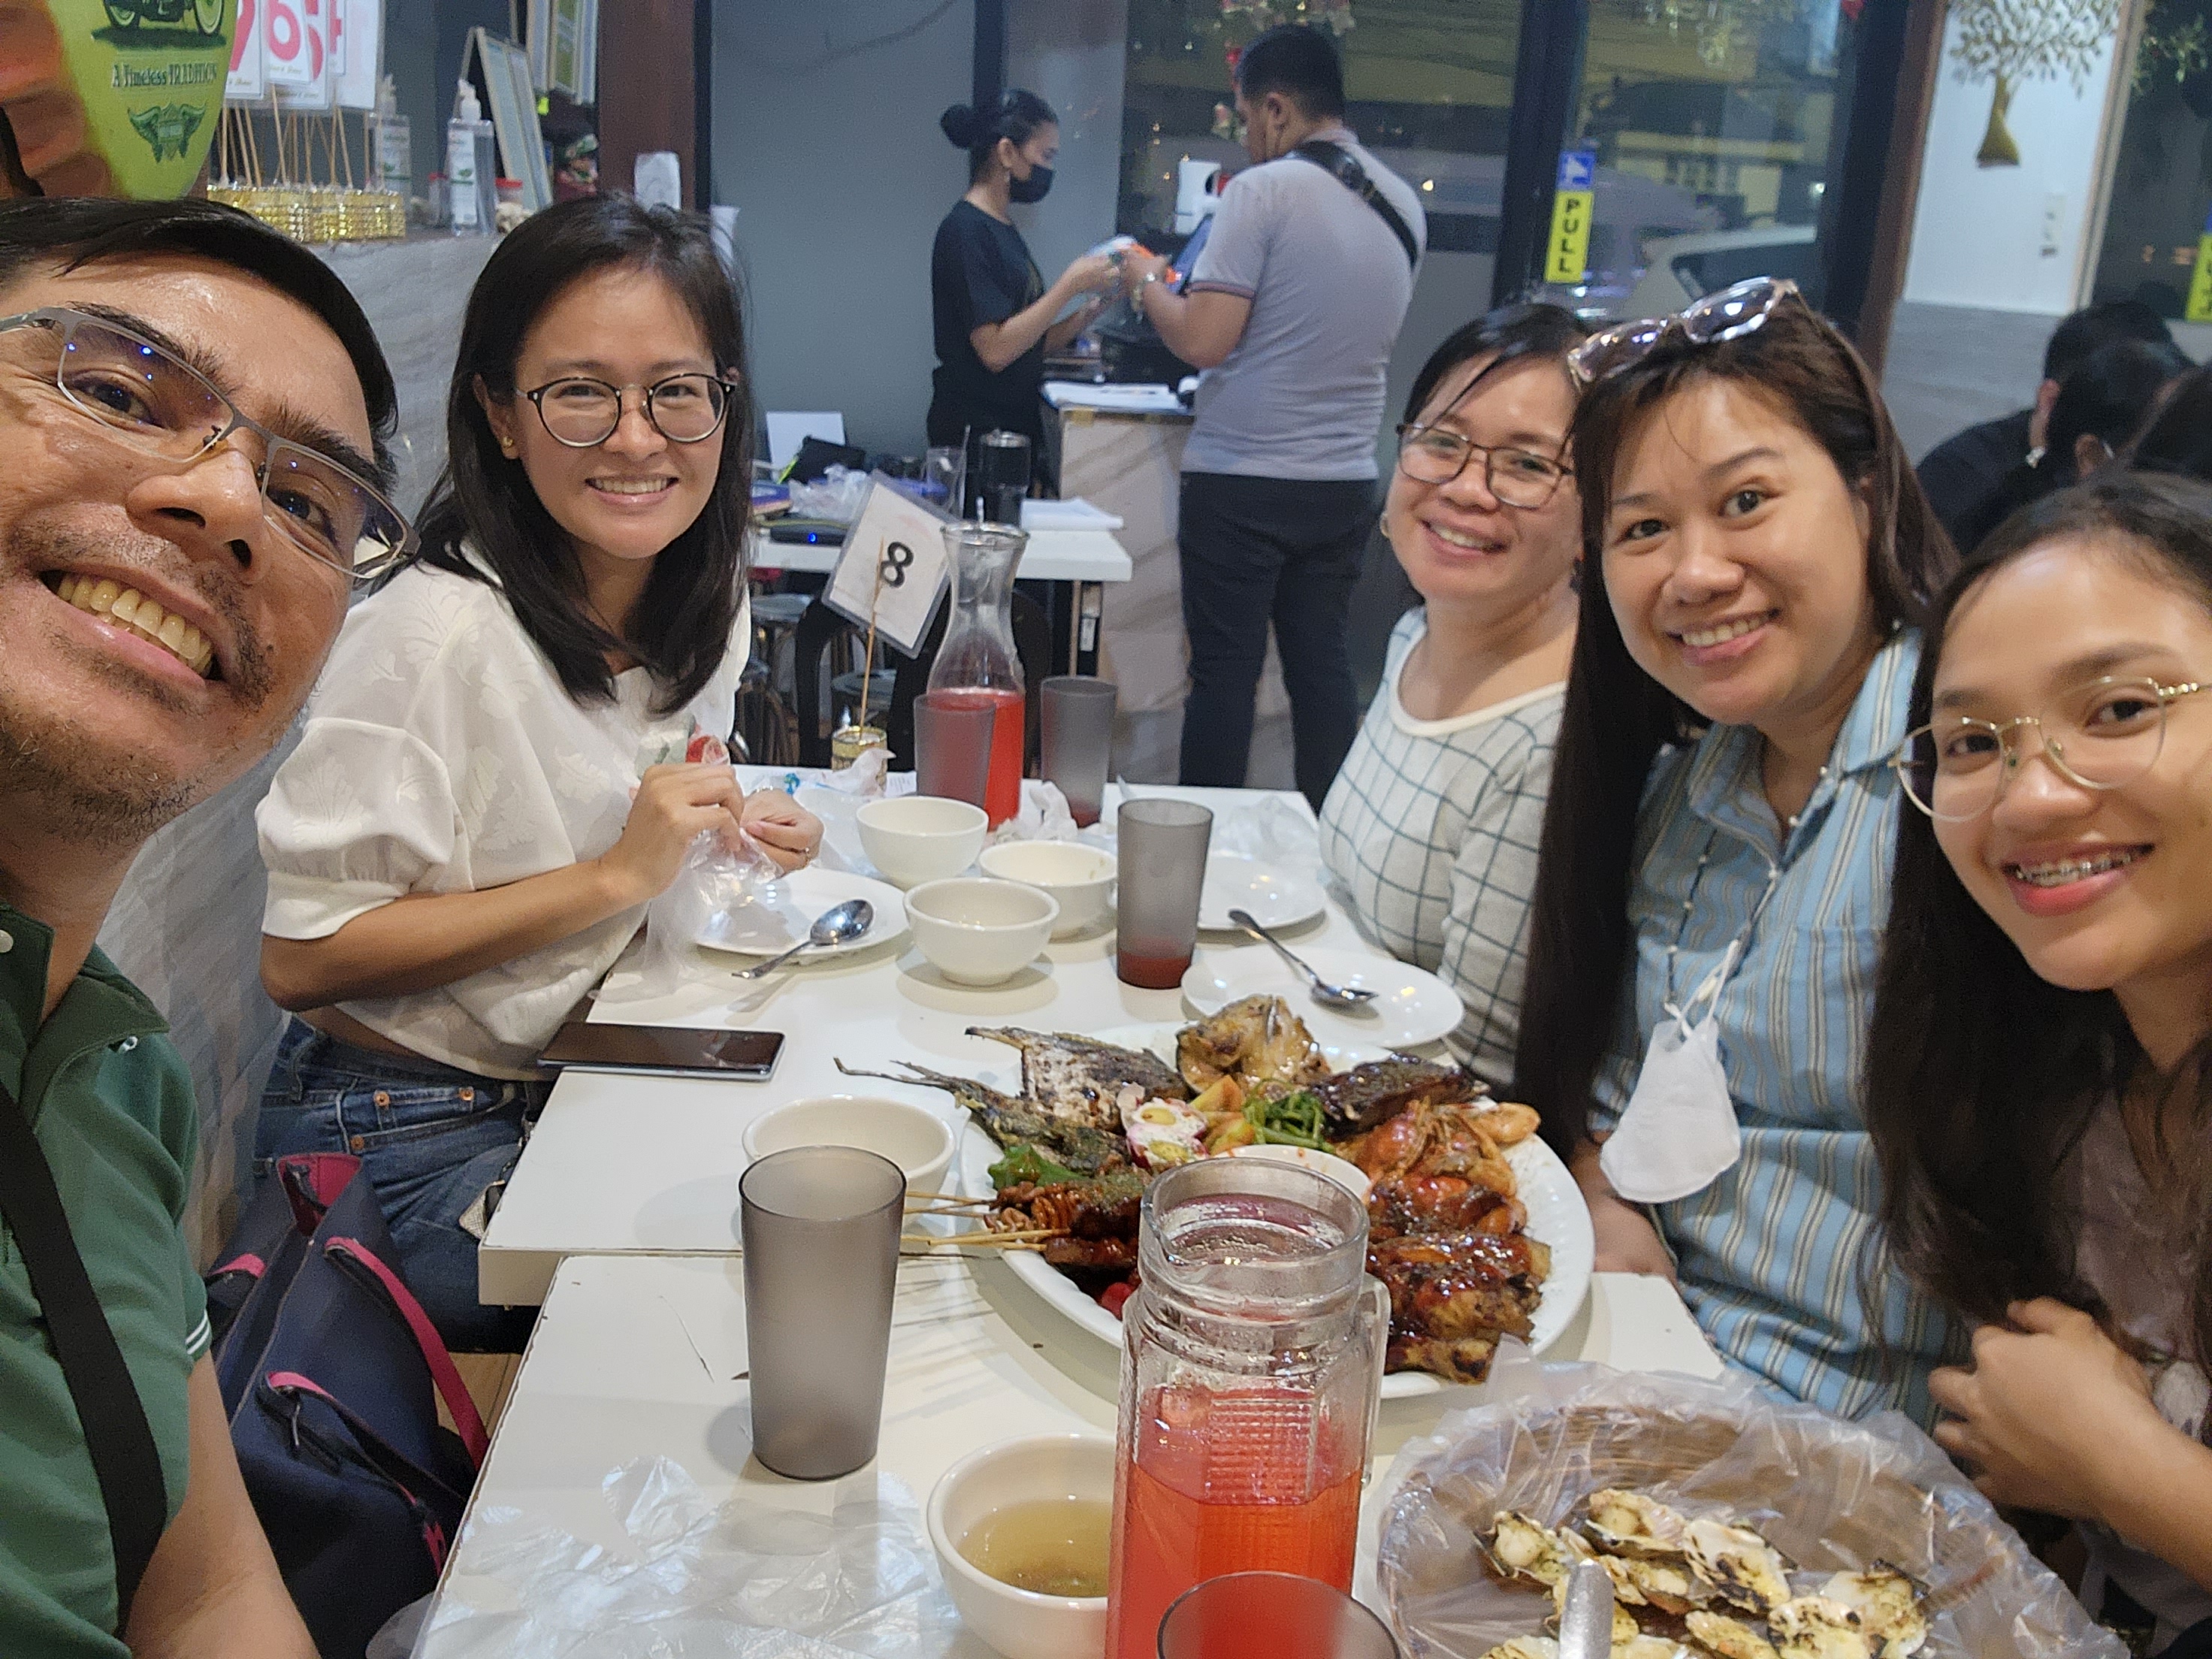 Barkada or group of friends dining and smiling at Tolentino's Unli Ihaw in Mandaluyong Branch